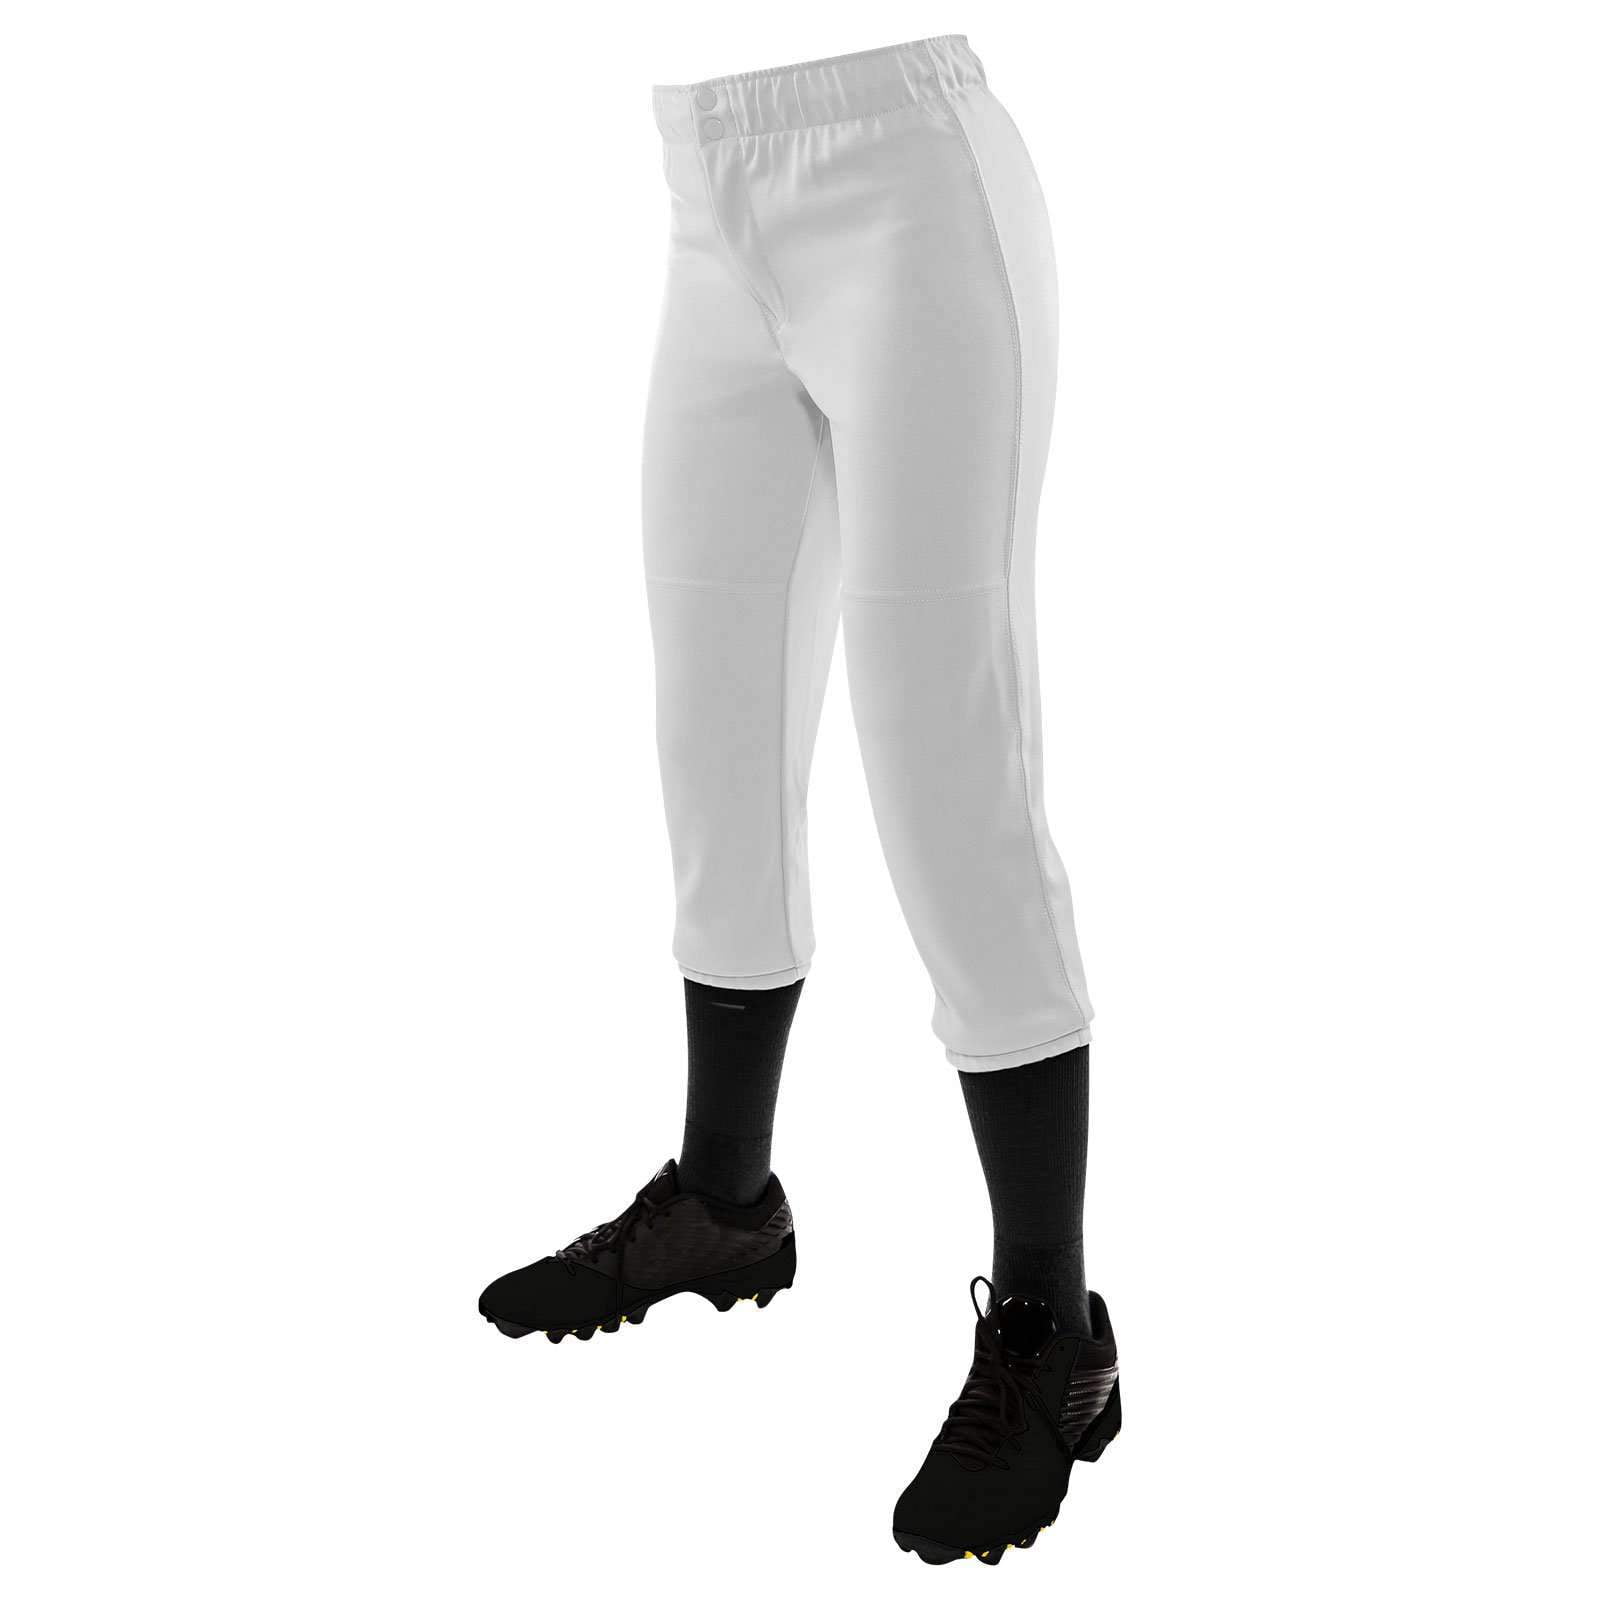 CS8 Champro 3/4 Length Compression Tights Youth & Men's 